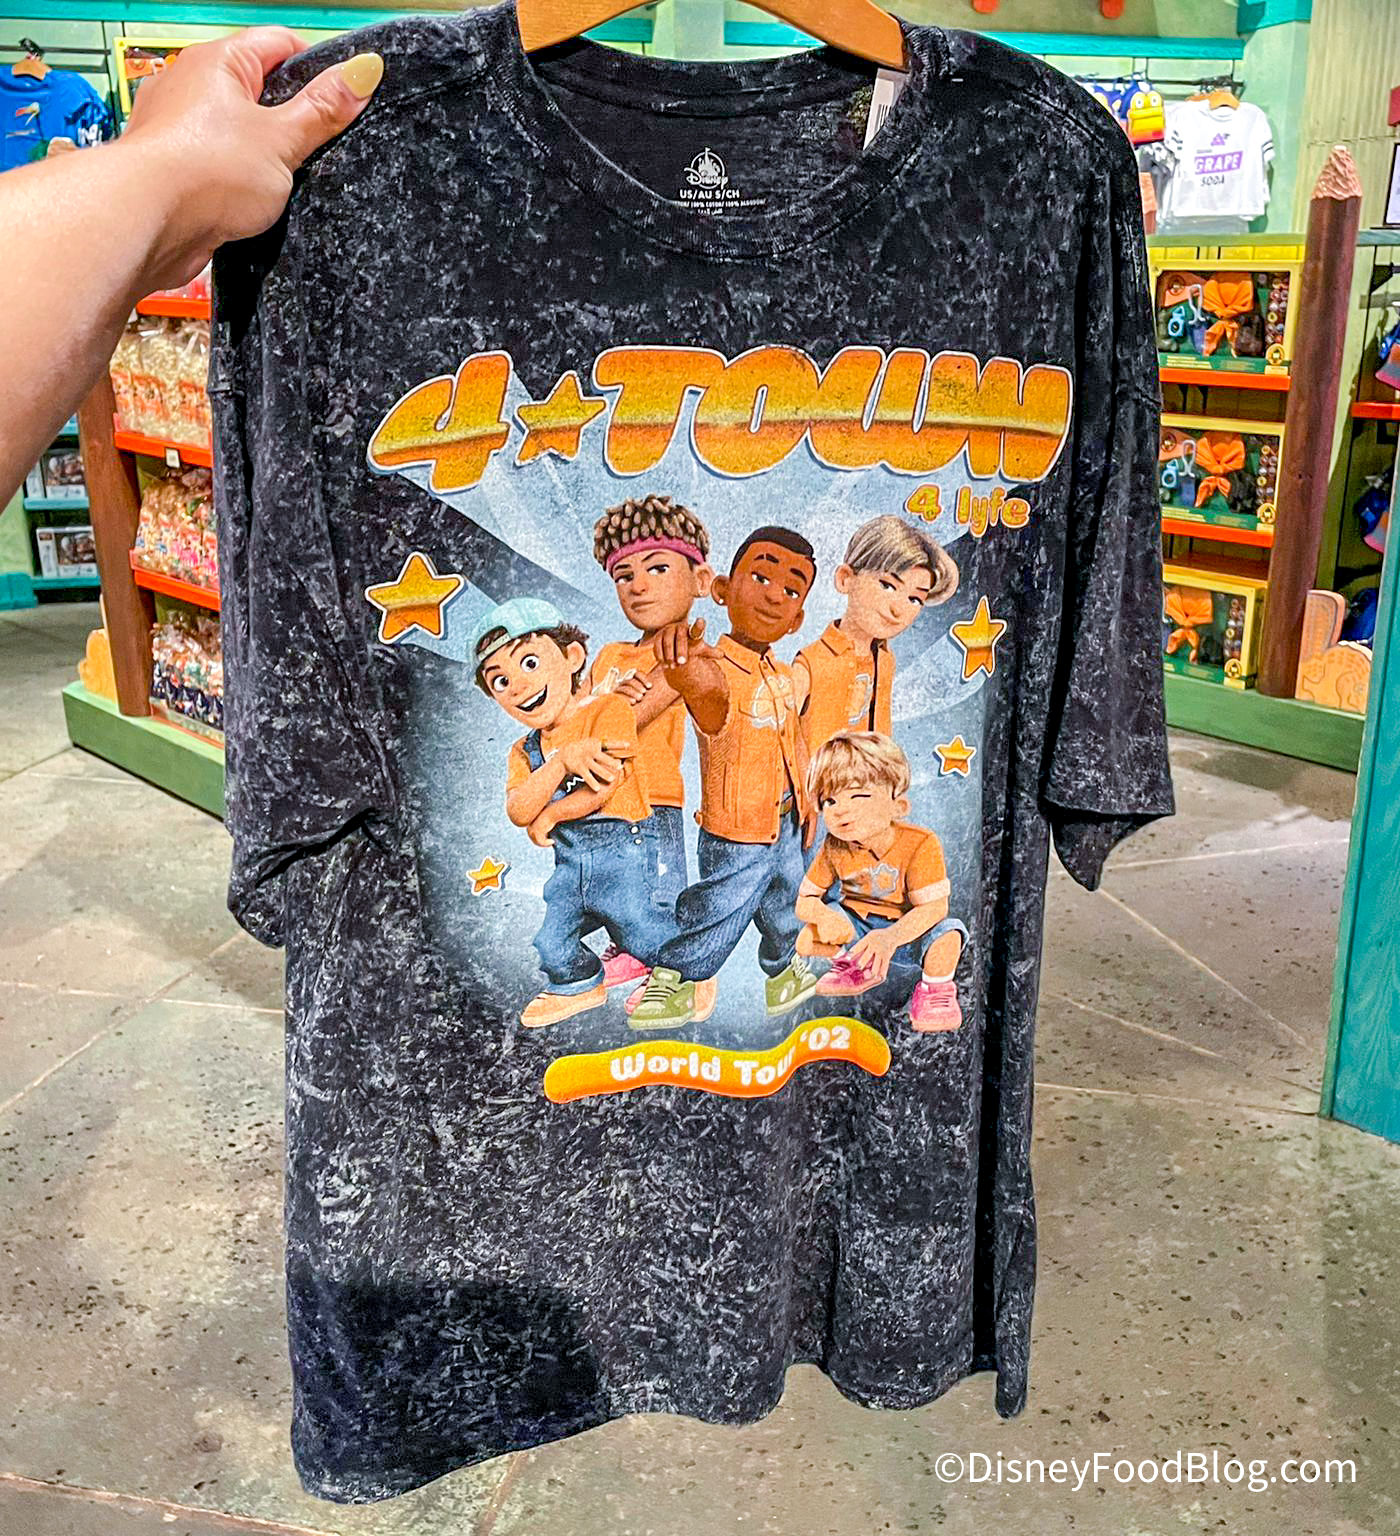 Our Inner 2000s Kid is SCREAMING at Disney's Boy Band Shirt